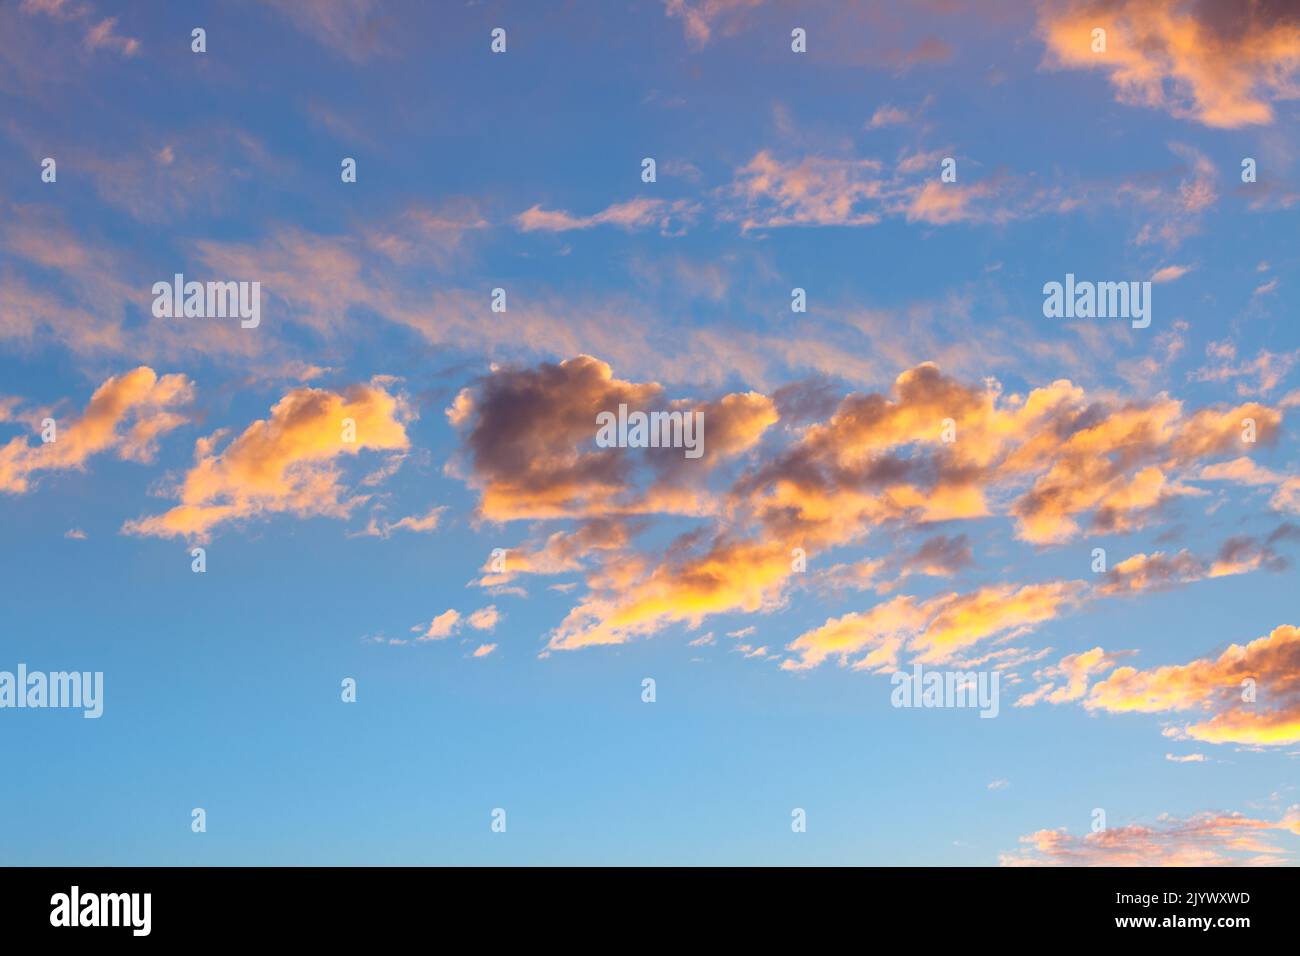 Sky with clouds at sunset Stock Photo